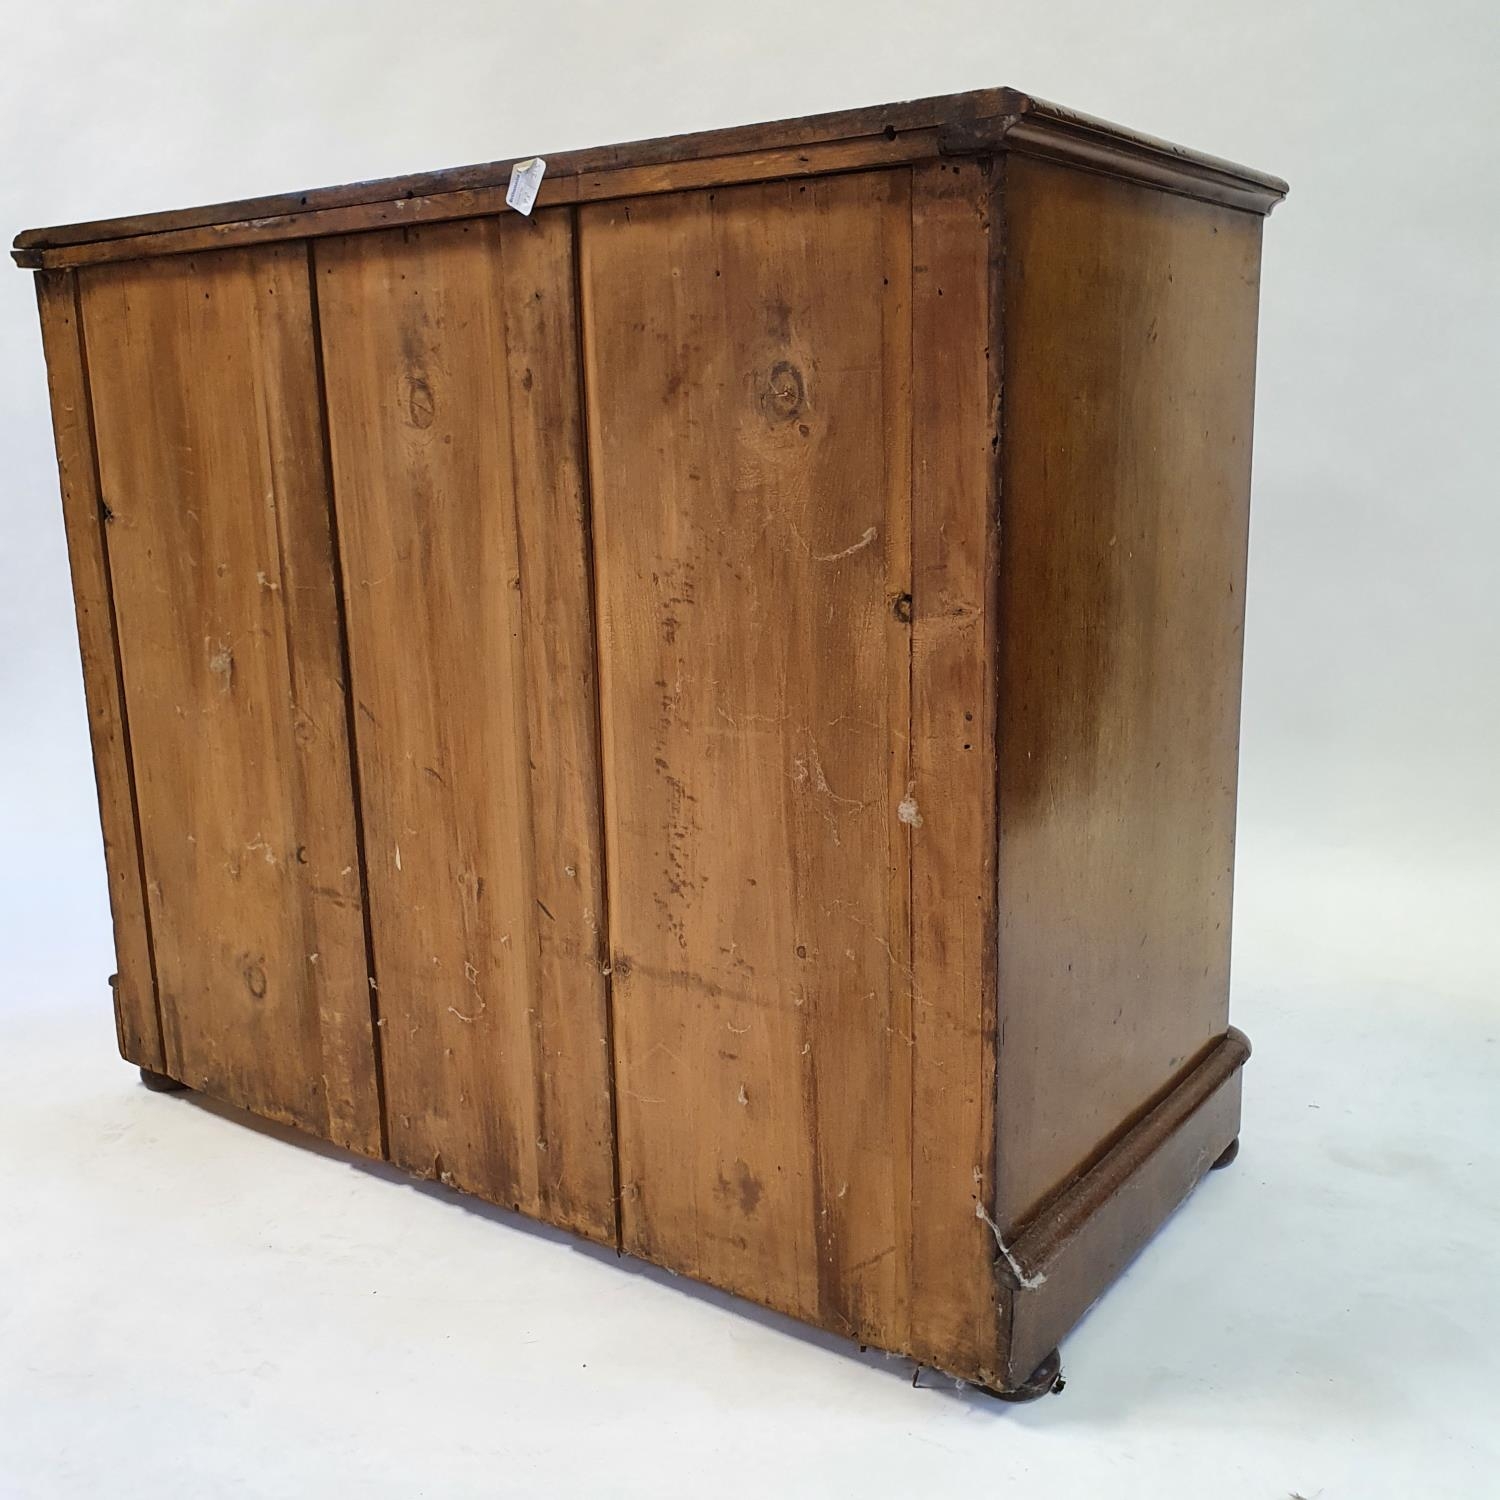 A 19th century mahogany chest, having three long drawers, 104 cm wide - Image 3 of 3